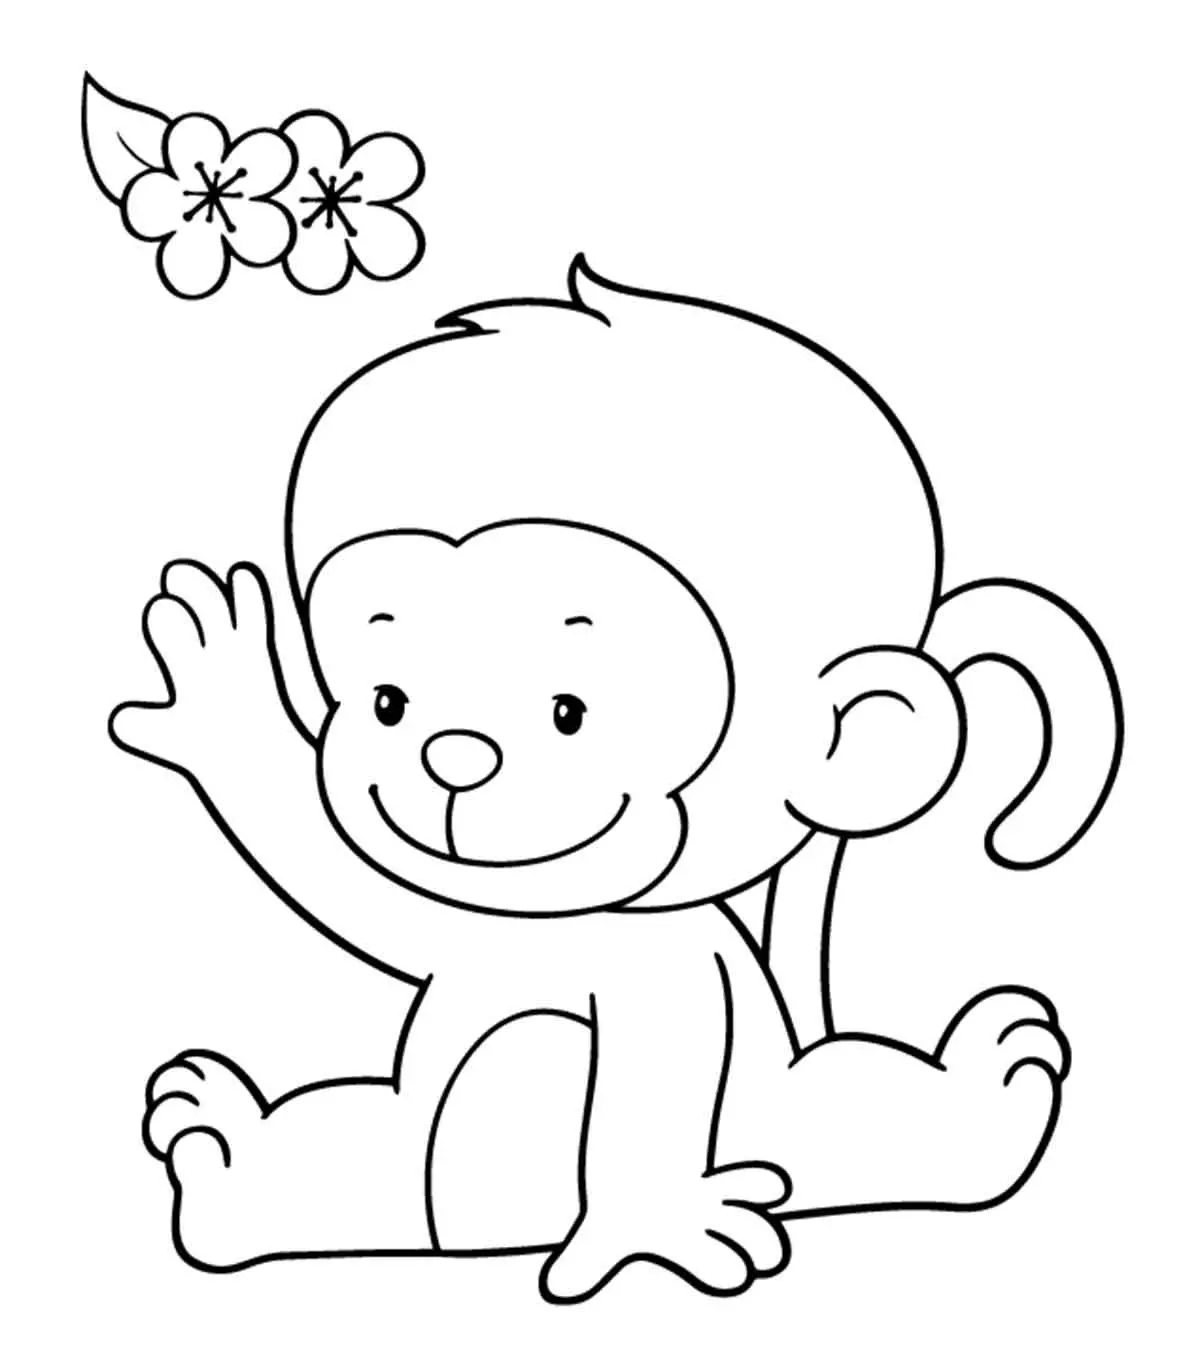 25 Cute Monkey Coloring Pages Your Toddler Will Love